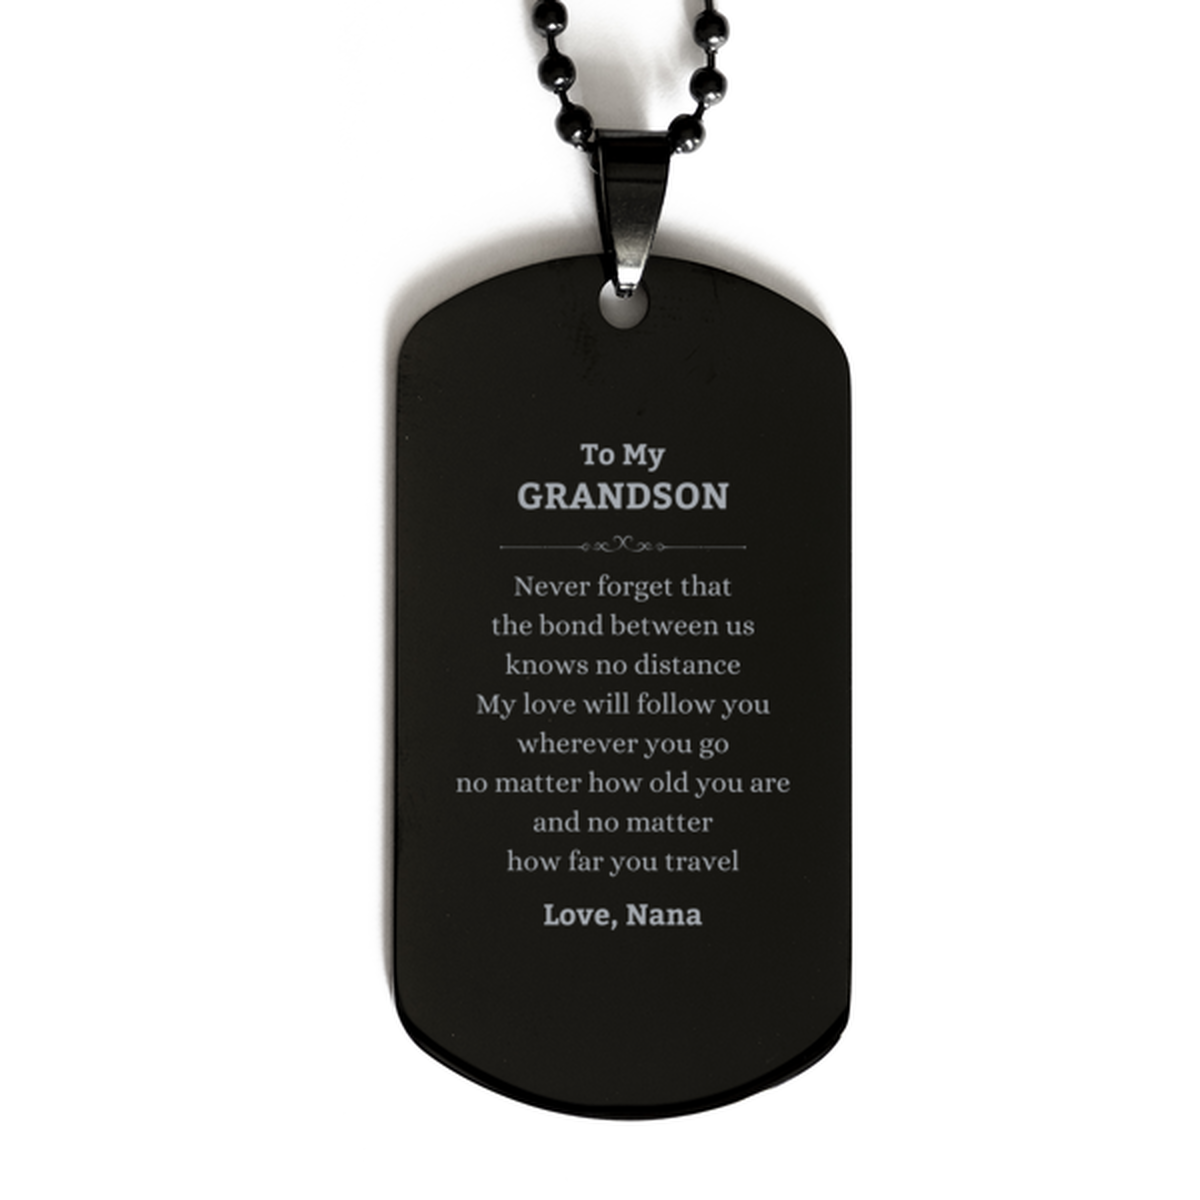 Grandson Birthday Gifts from Nana, Adjustable Black Dog Tag for Grandson Christmas Graduation Unique Gifts Grandson Never forget that the bond between us knows no distance. Love, Nana